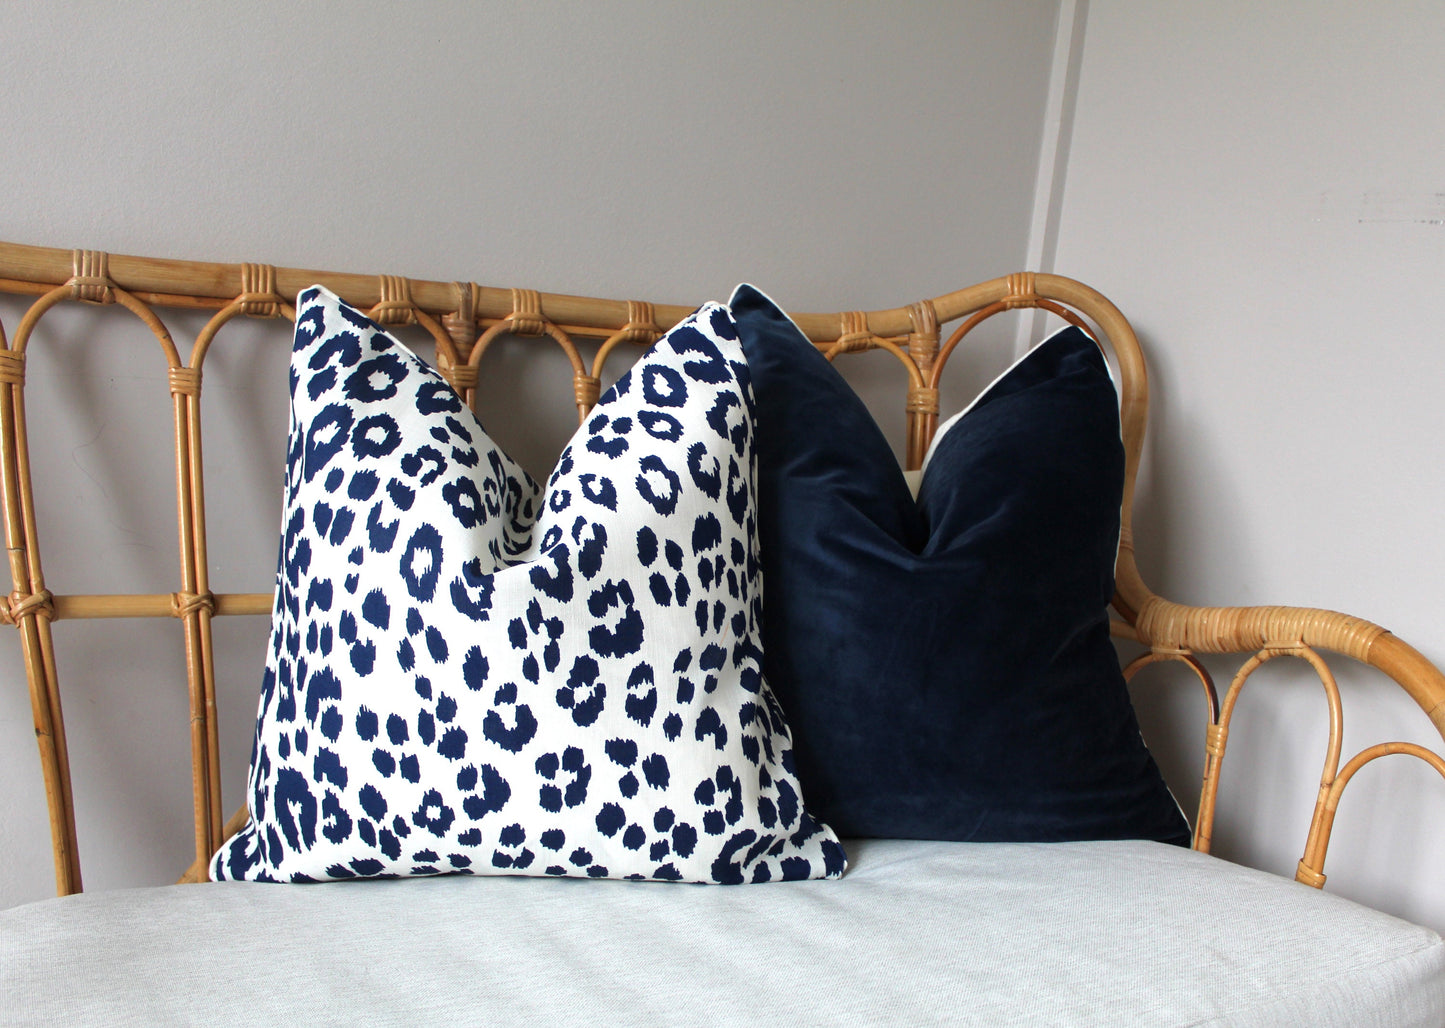 Iconic Leopard in Ink cushion Covers by Schumacher